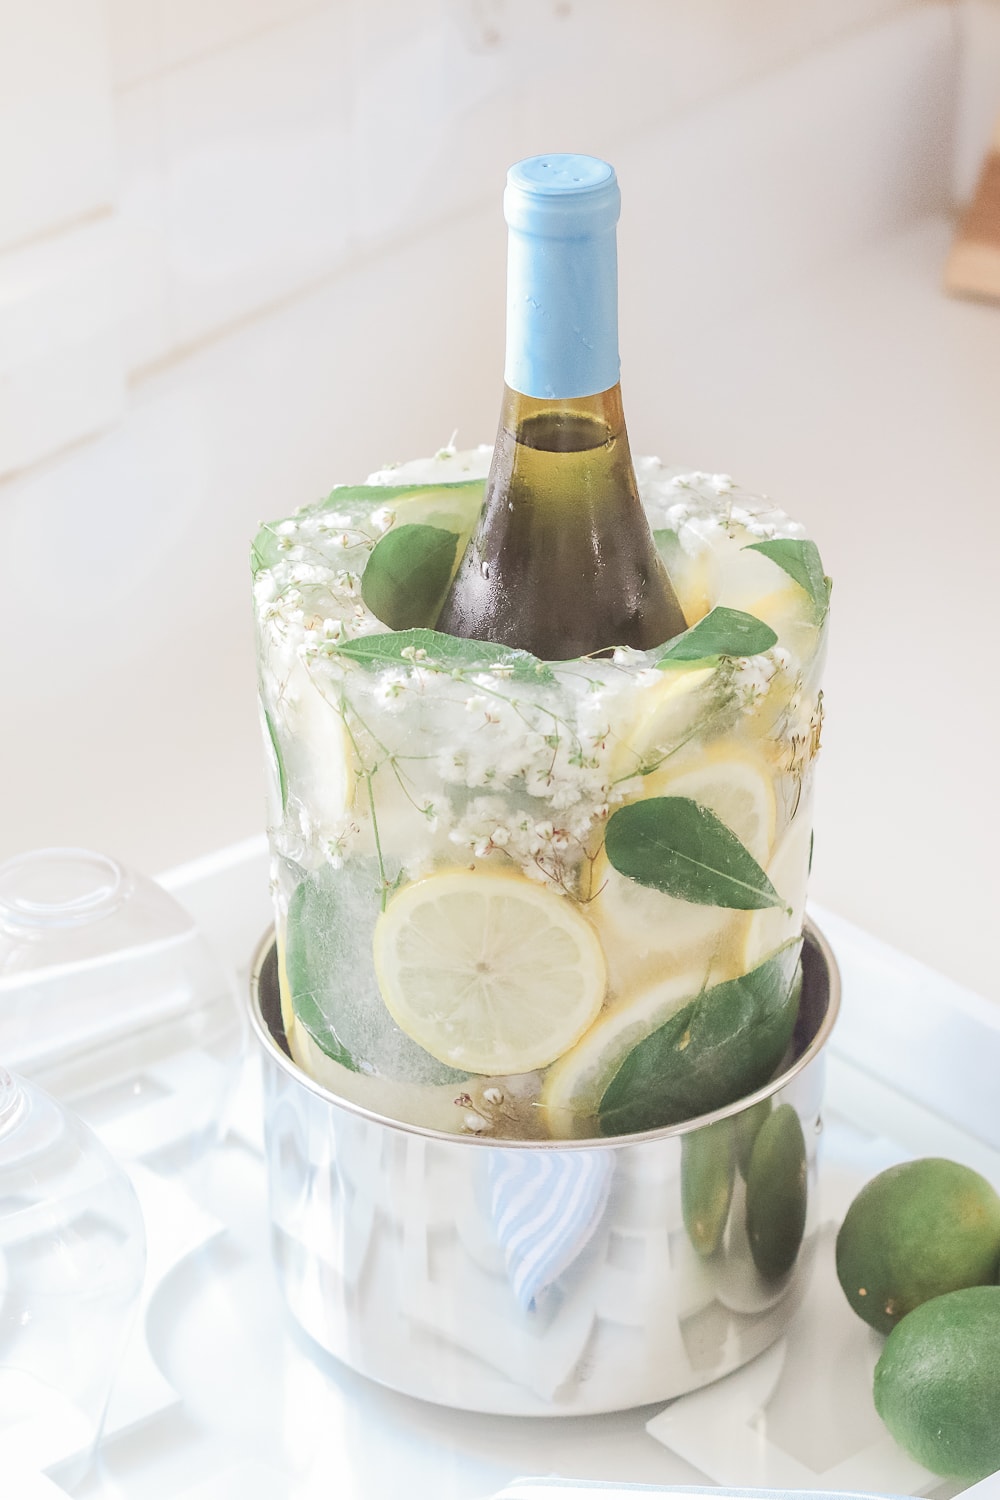 Laura Ashley ice bucket mold used by entertaining blogger Stephanie Ziajka of Diary of a Debutante to create the perfect citrus ice bucket for summer